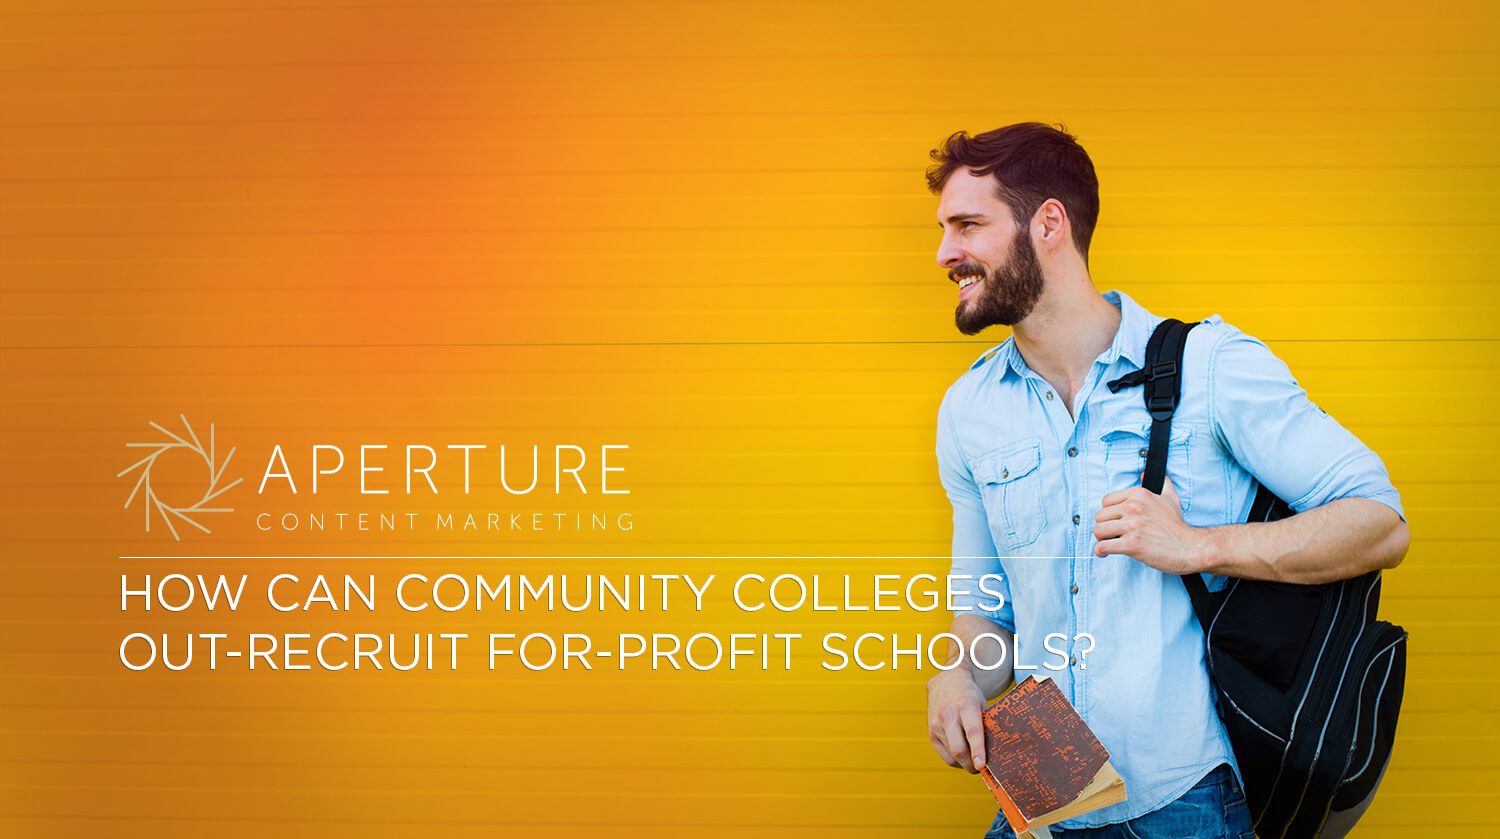 How Can Community Colleges Out-Recruit For-Profit Schools?